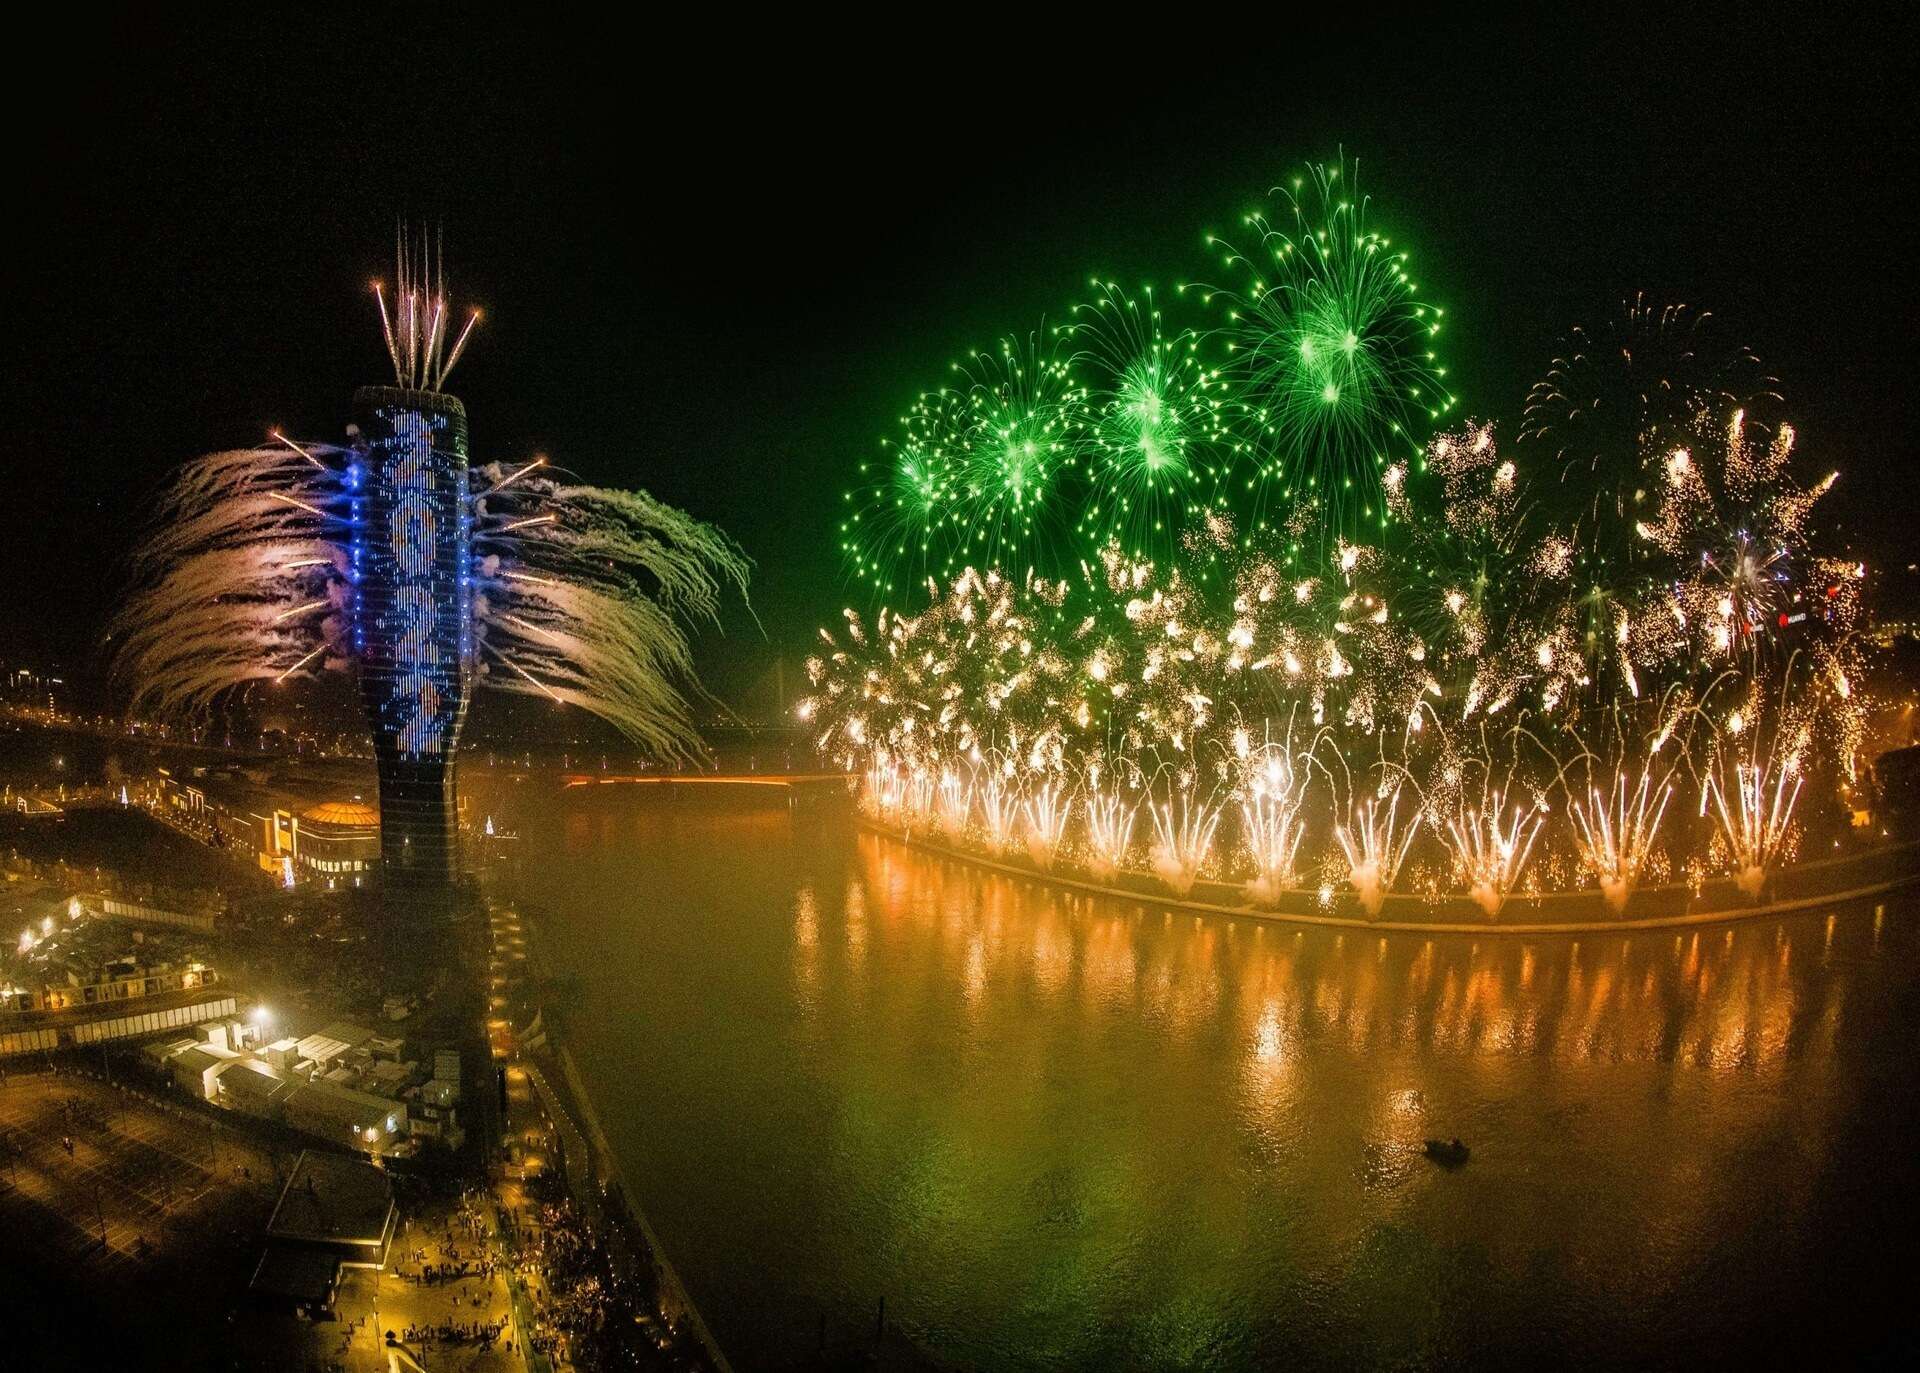 World-class New Year’s spectacle: Laser show, concerts and fireworks from the Kula Belgrade